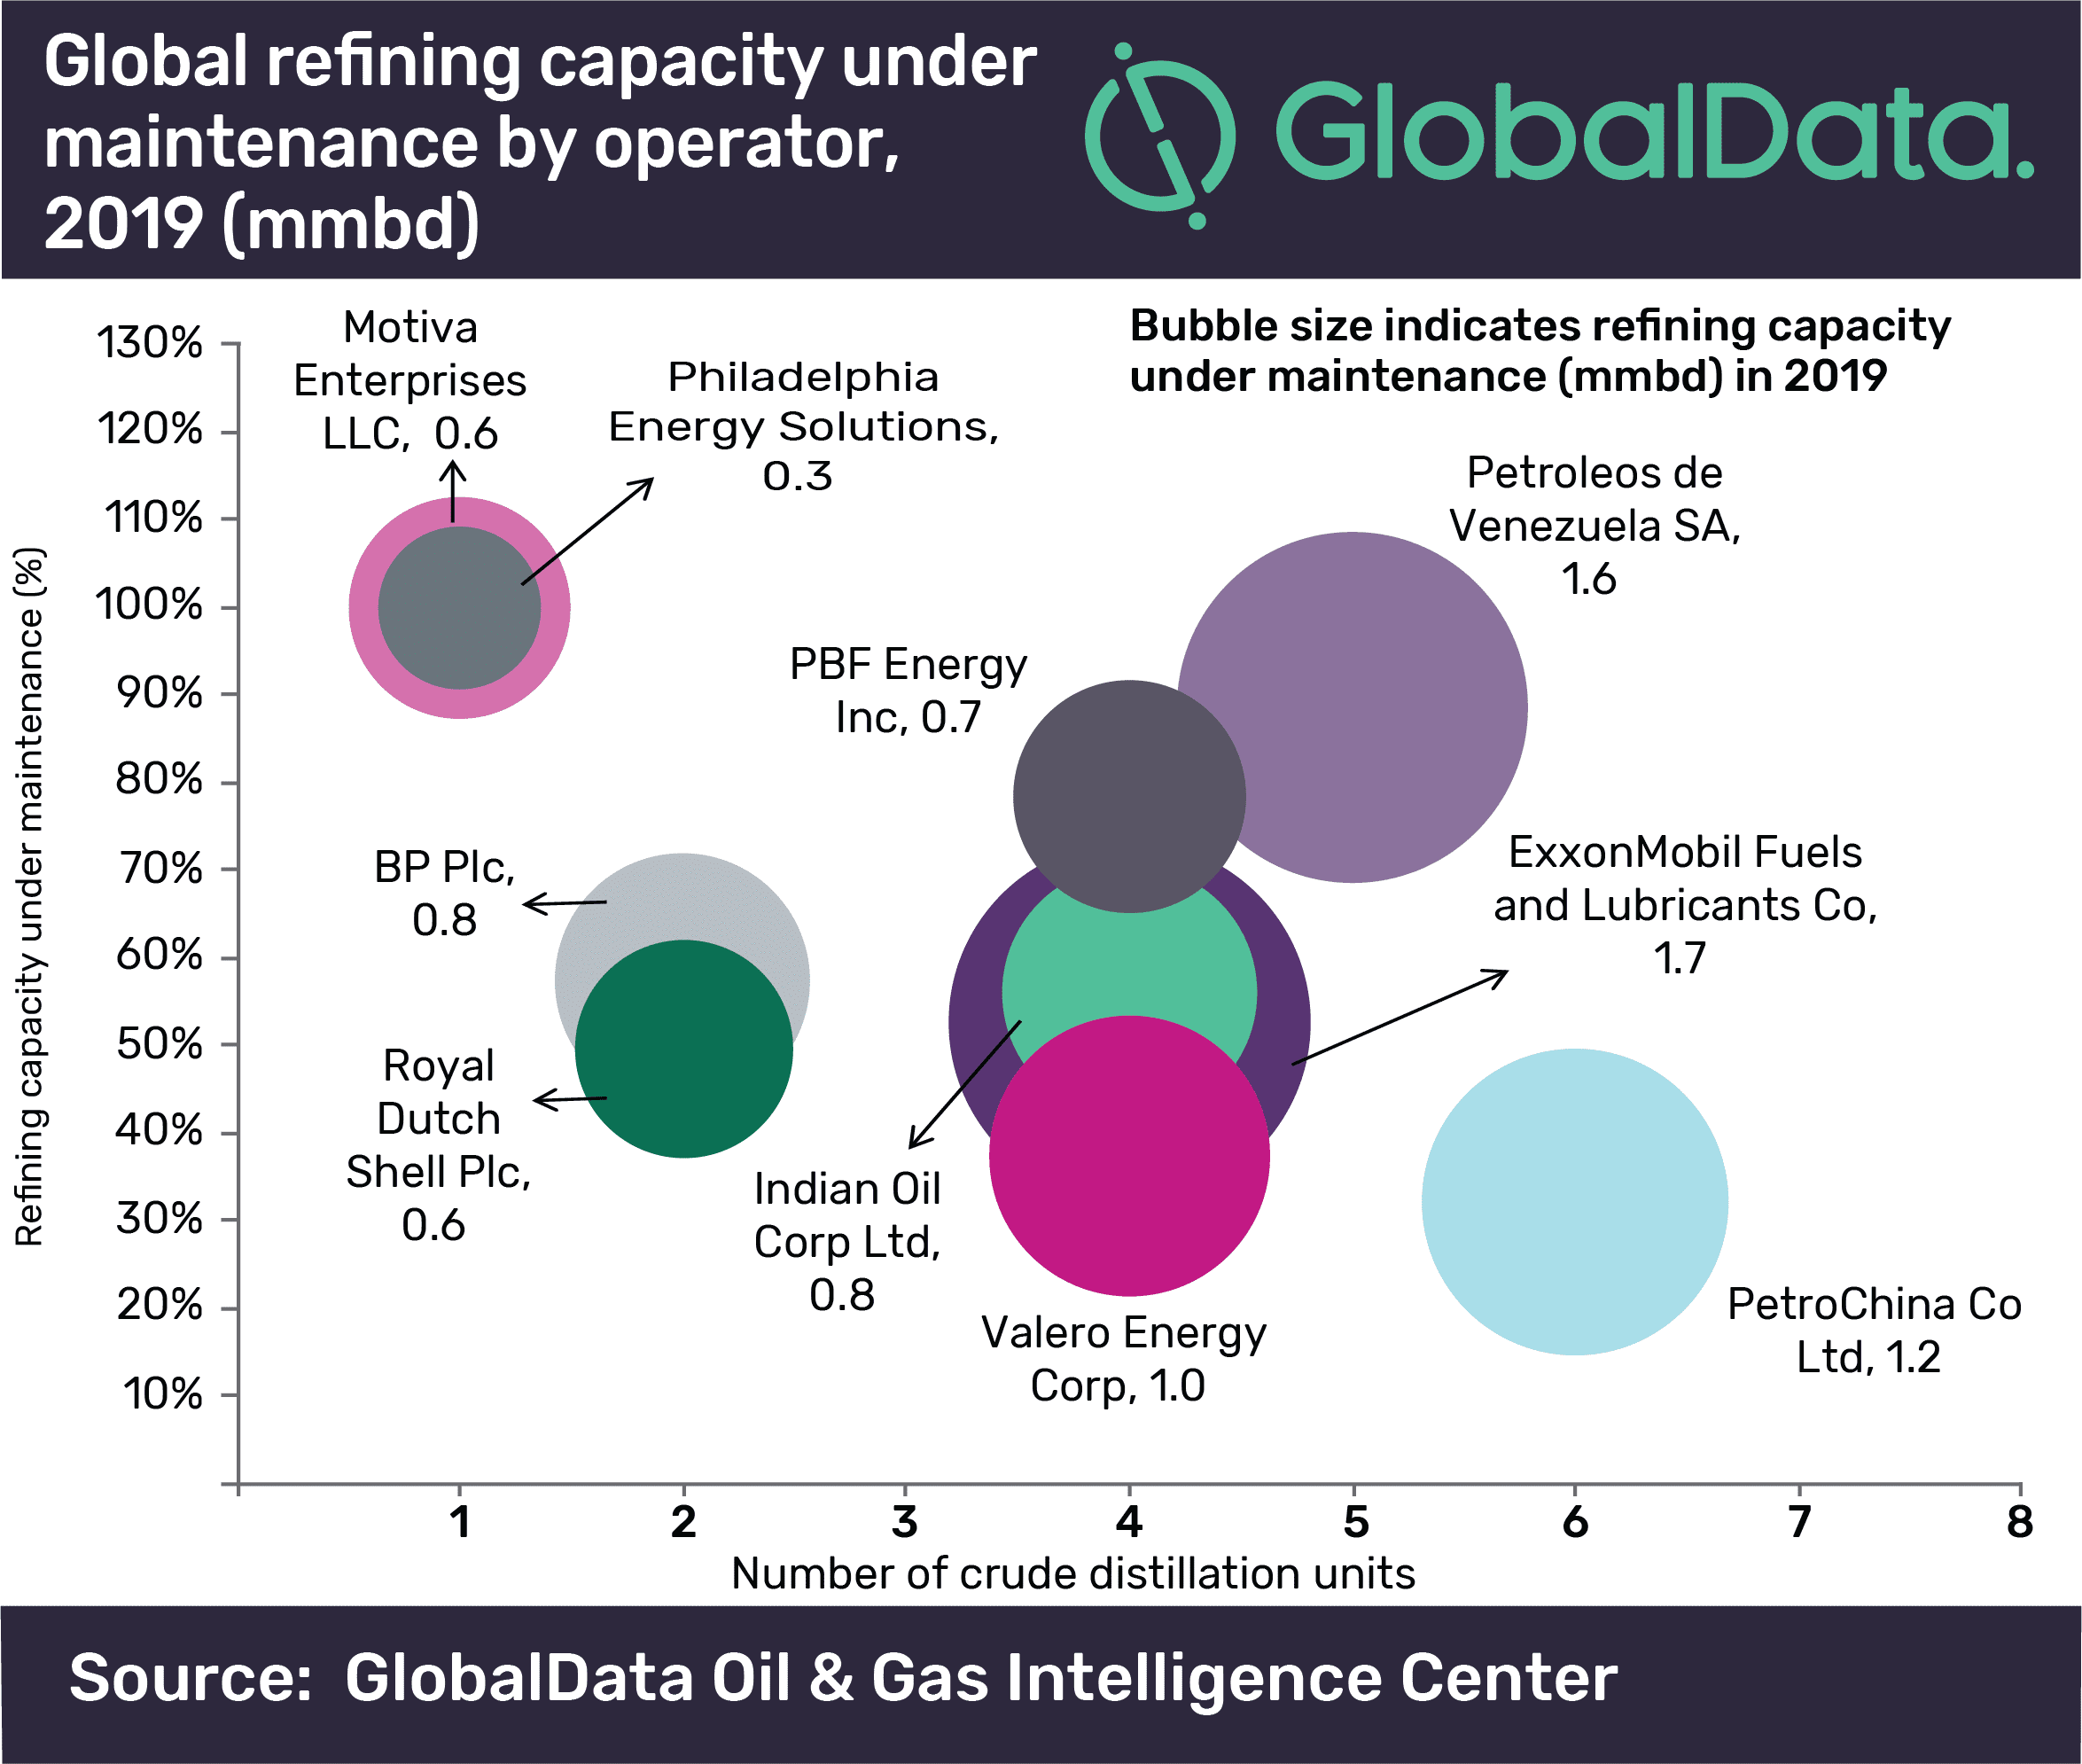 ExxonMobil Fuels incurs highest crude oil refinery maintenance globally in 2019